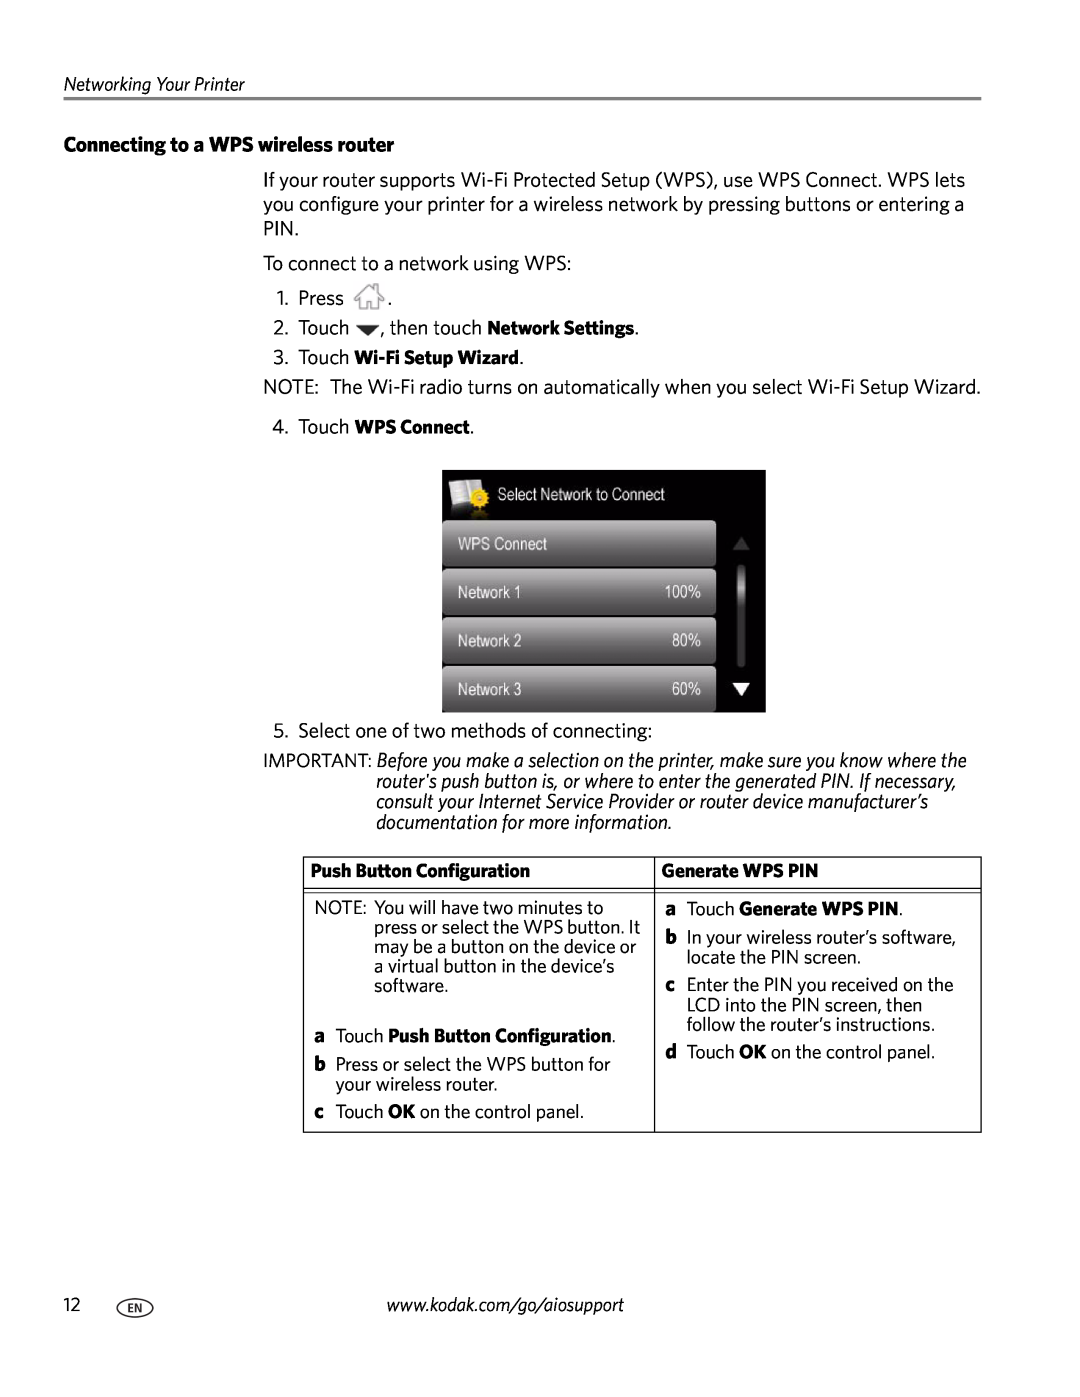 Kodak 7.1 manual Connecting to a WPS wireless router, Networking Your Printer, Touch Wi-Fi Setup Wizard, Touch WPS Connect 